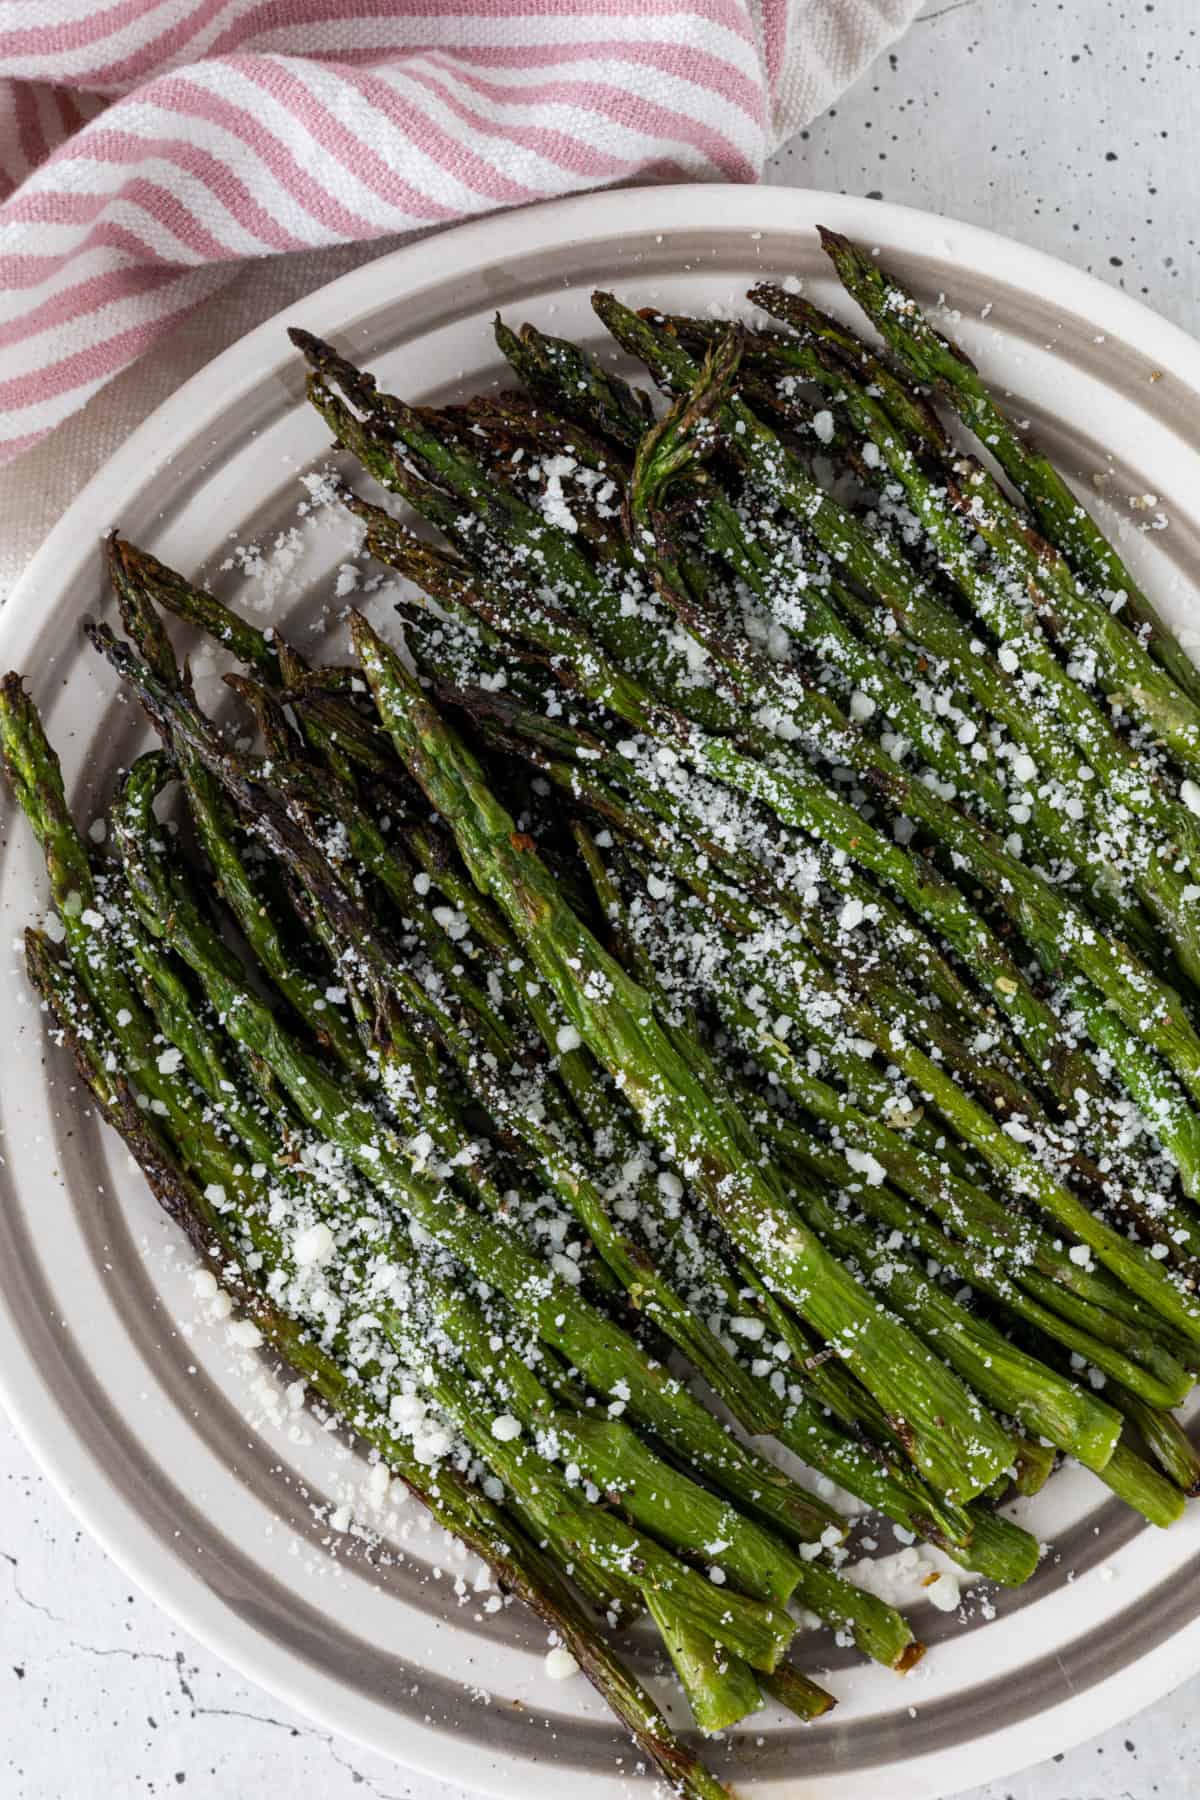 A plate of air-fried asparagus garnished with parmesan cheese.